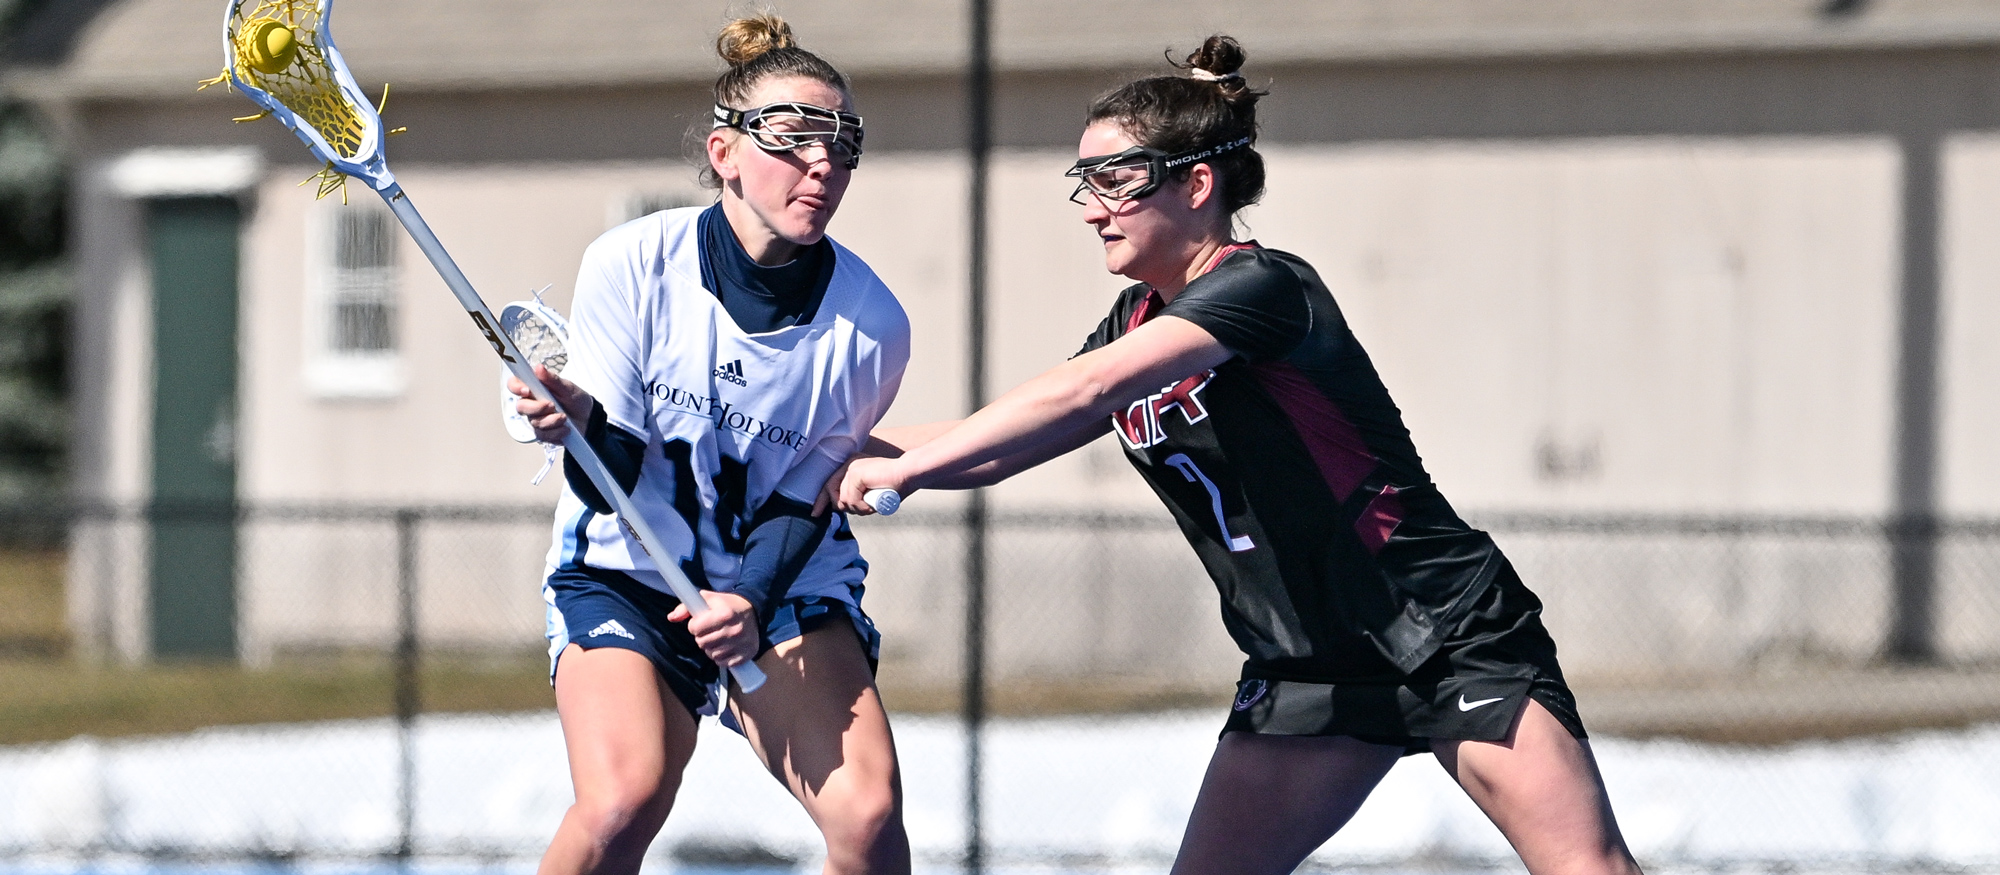 Emi Bisson led Mount Holyoke with six goals and four assists in an 18-4 win over North Central (Ill.) on March 15, 2023 in Georgetown, Texas. (RJB Sports file photo)